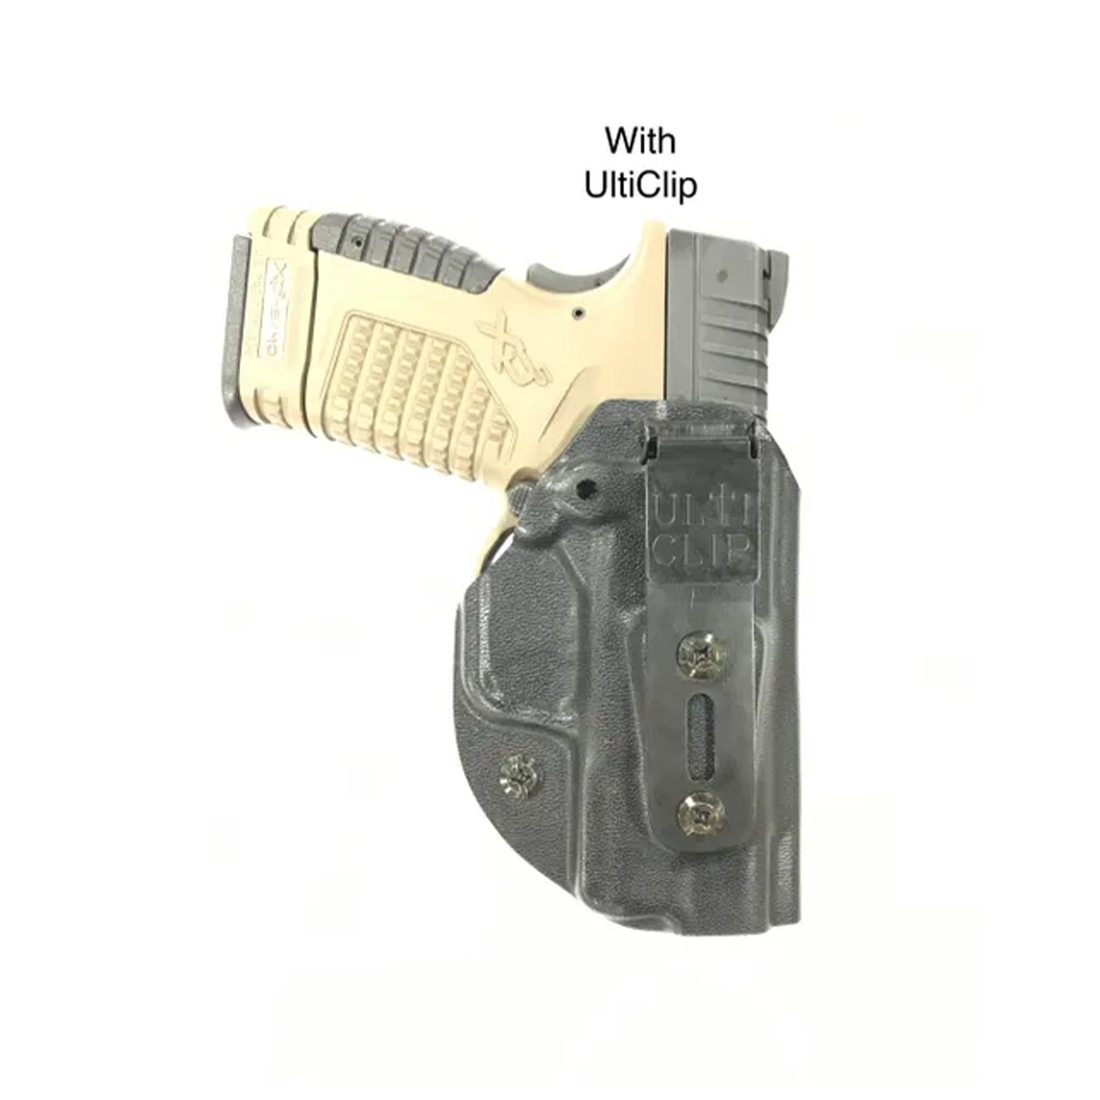 Smith & Wesson IWB Holsters